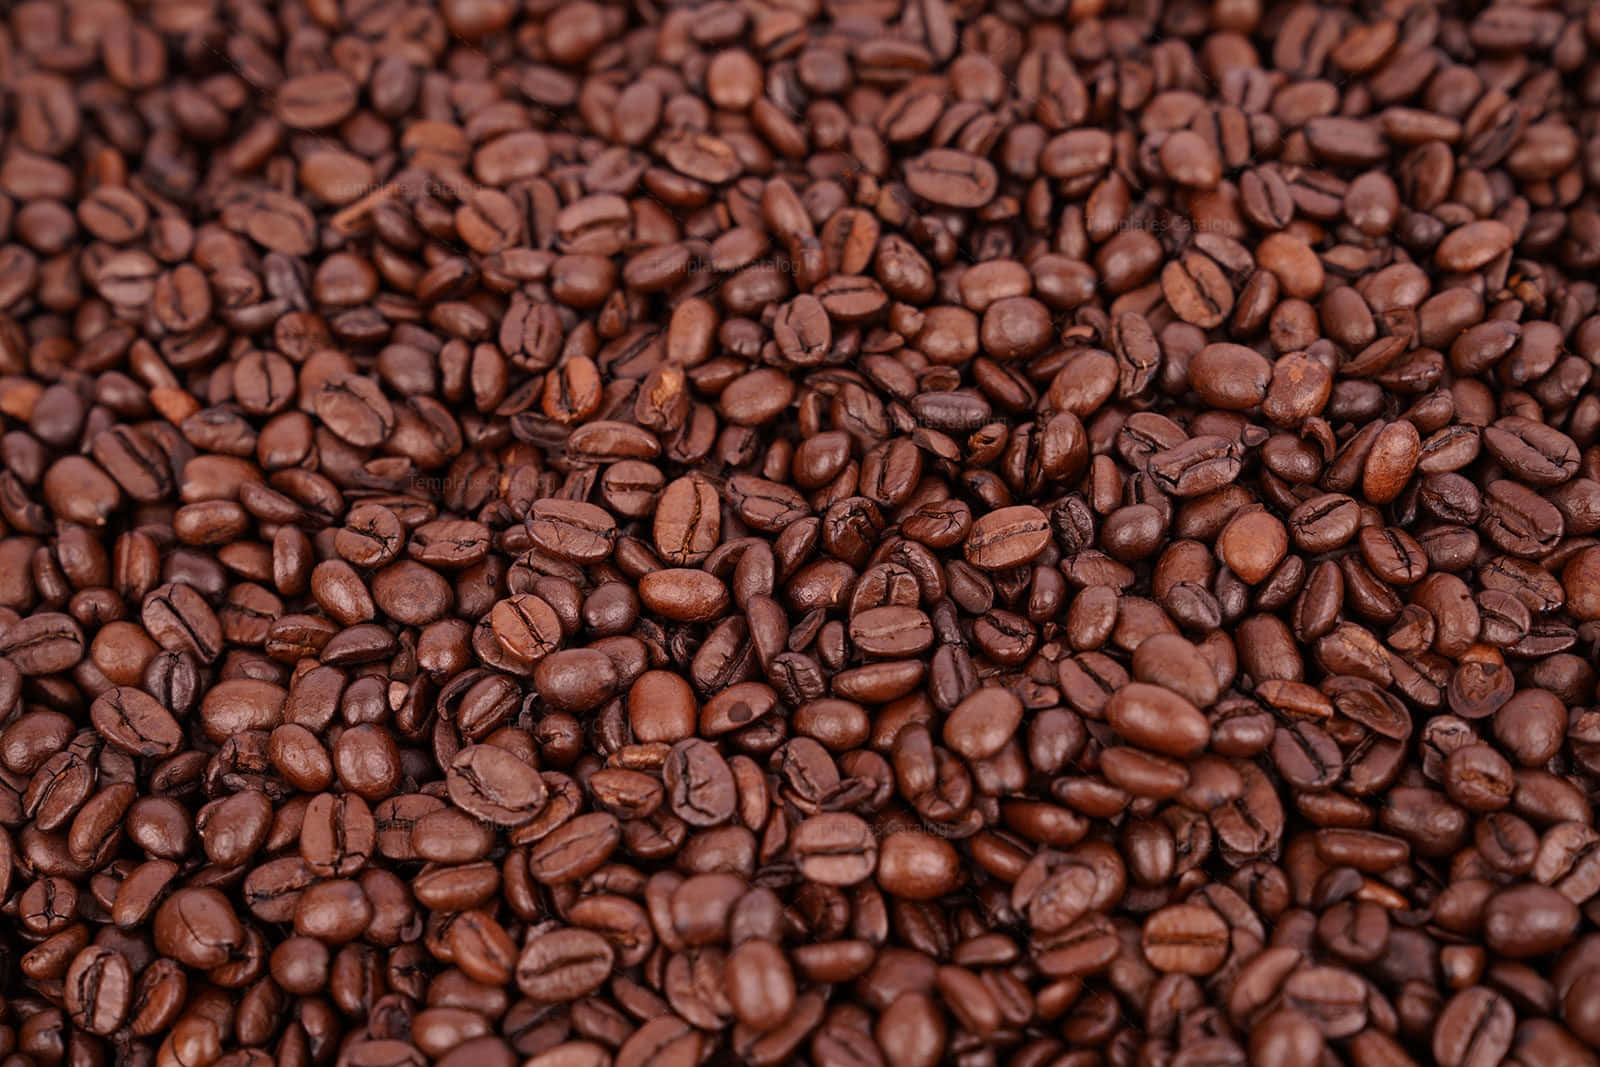 Freshly roasted coffee beans give off a delicious aroma.